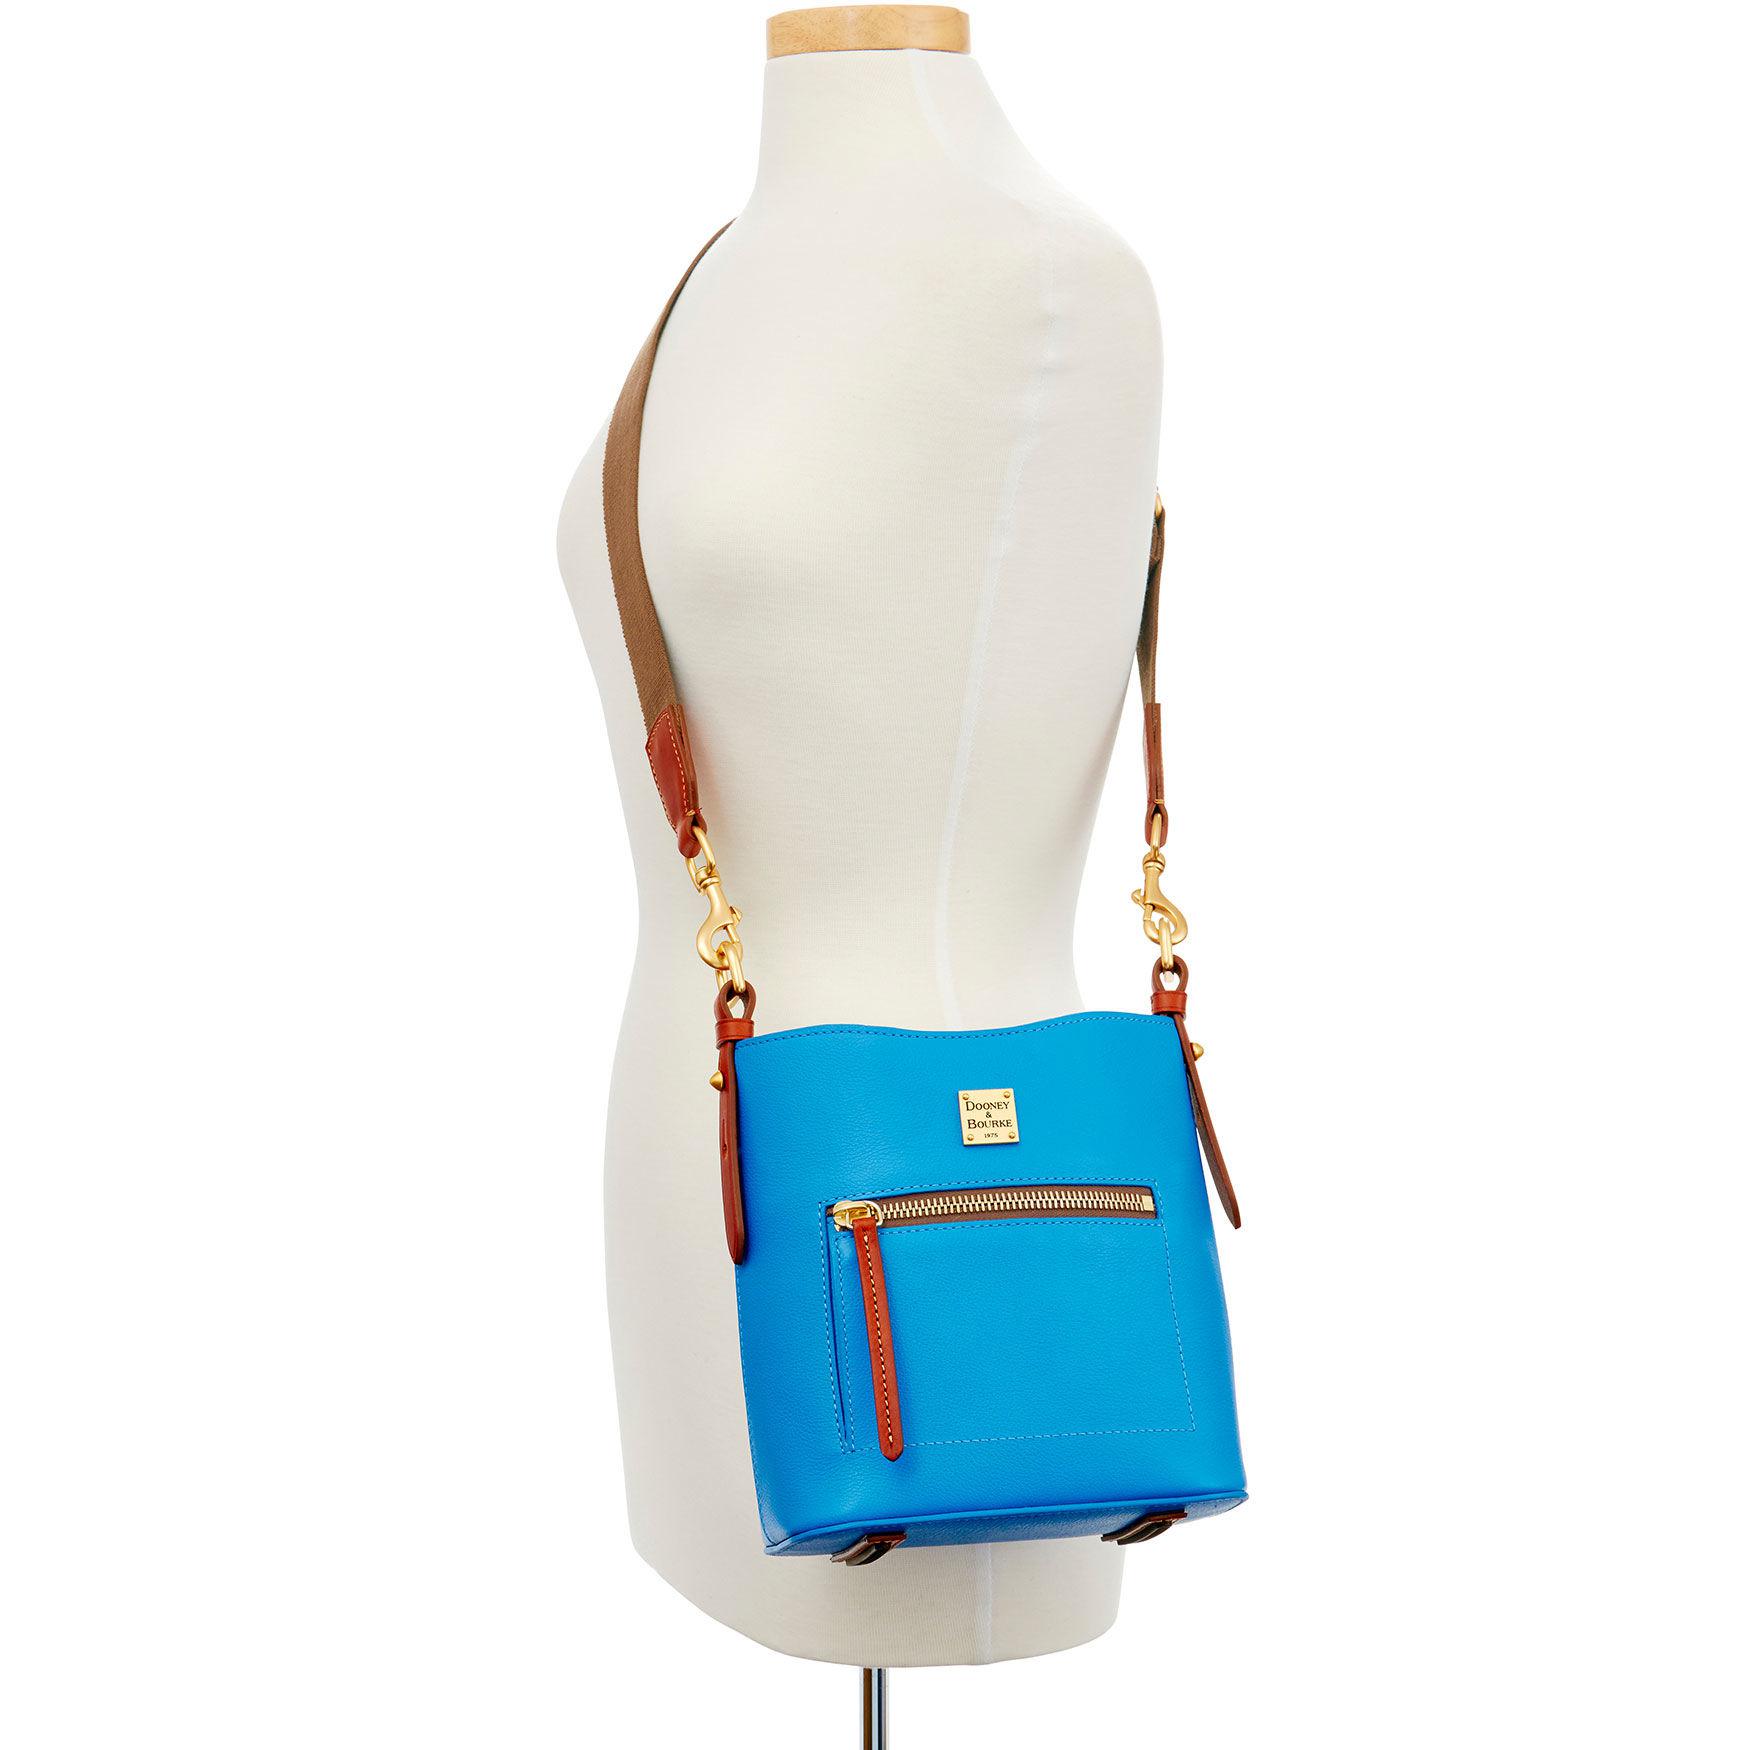 Dooney & Bourke Leather Raleigh Small Roxy Bag in Blue - Lyst